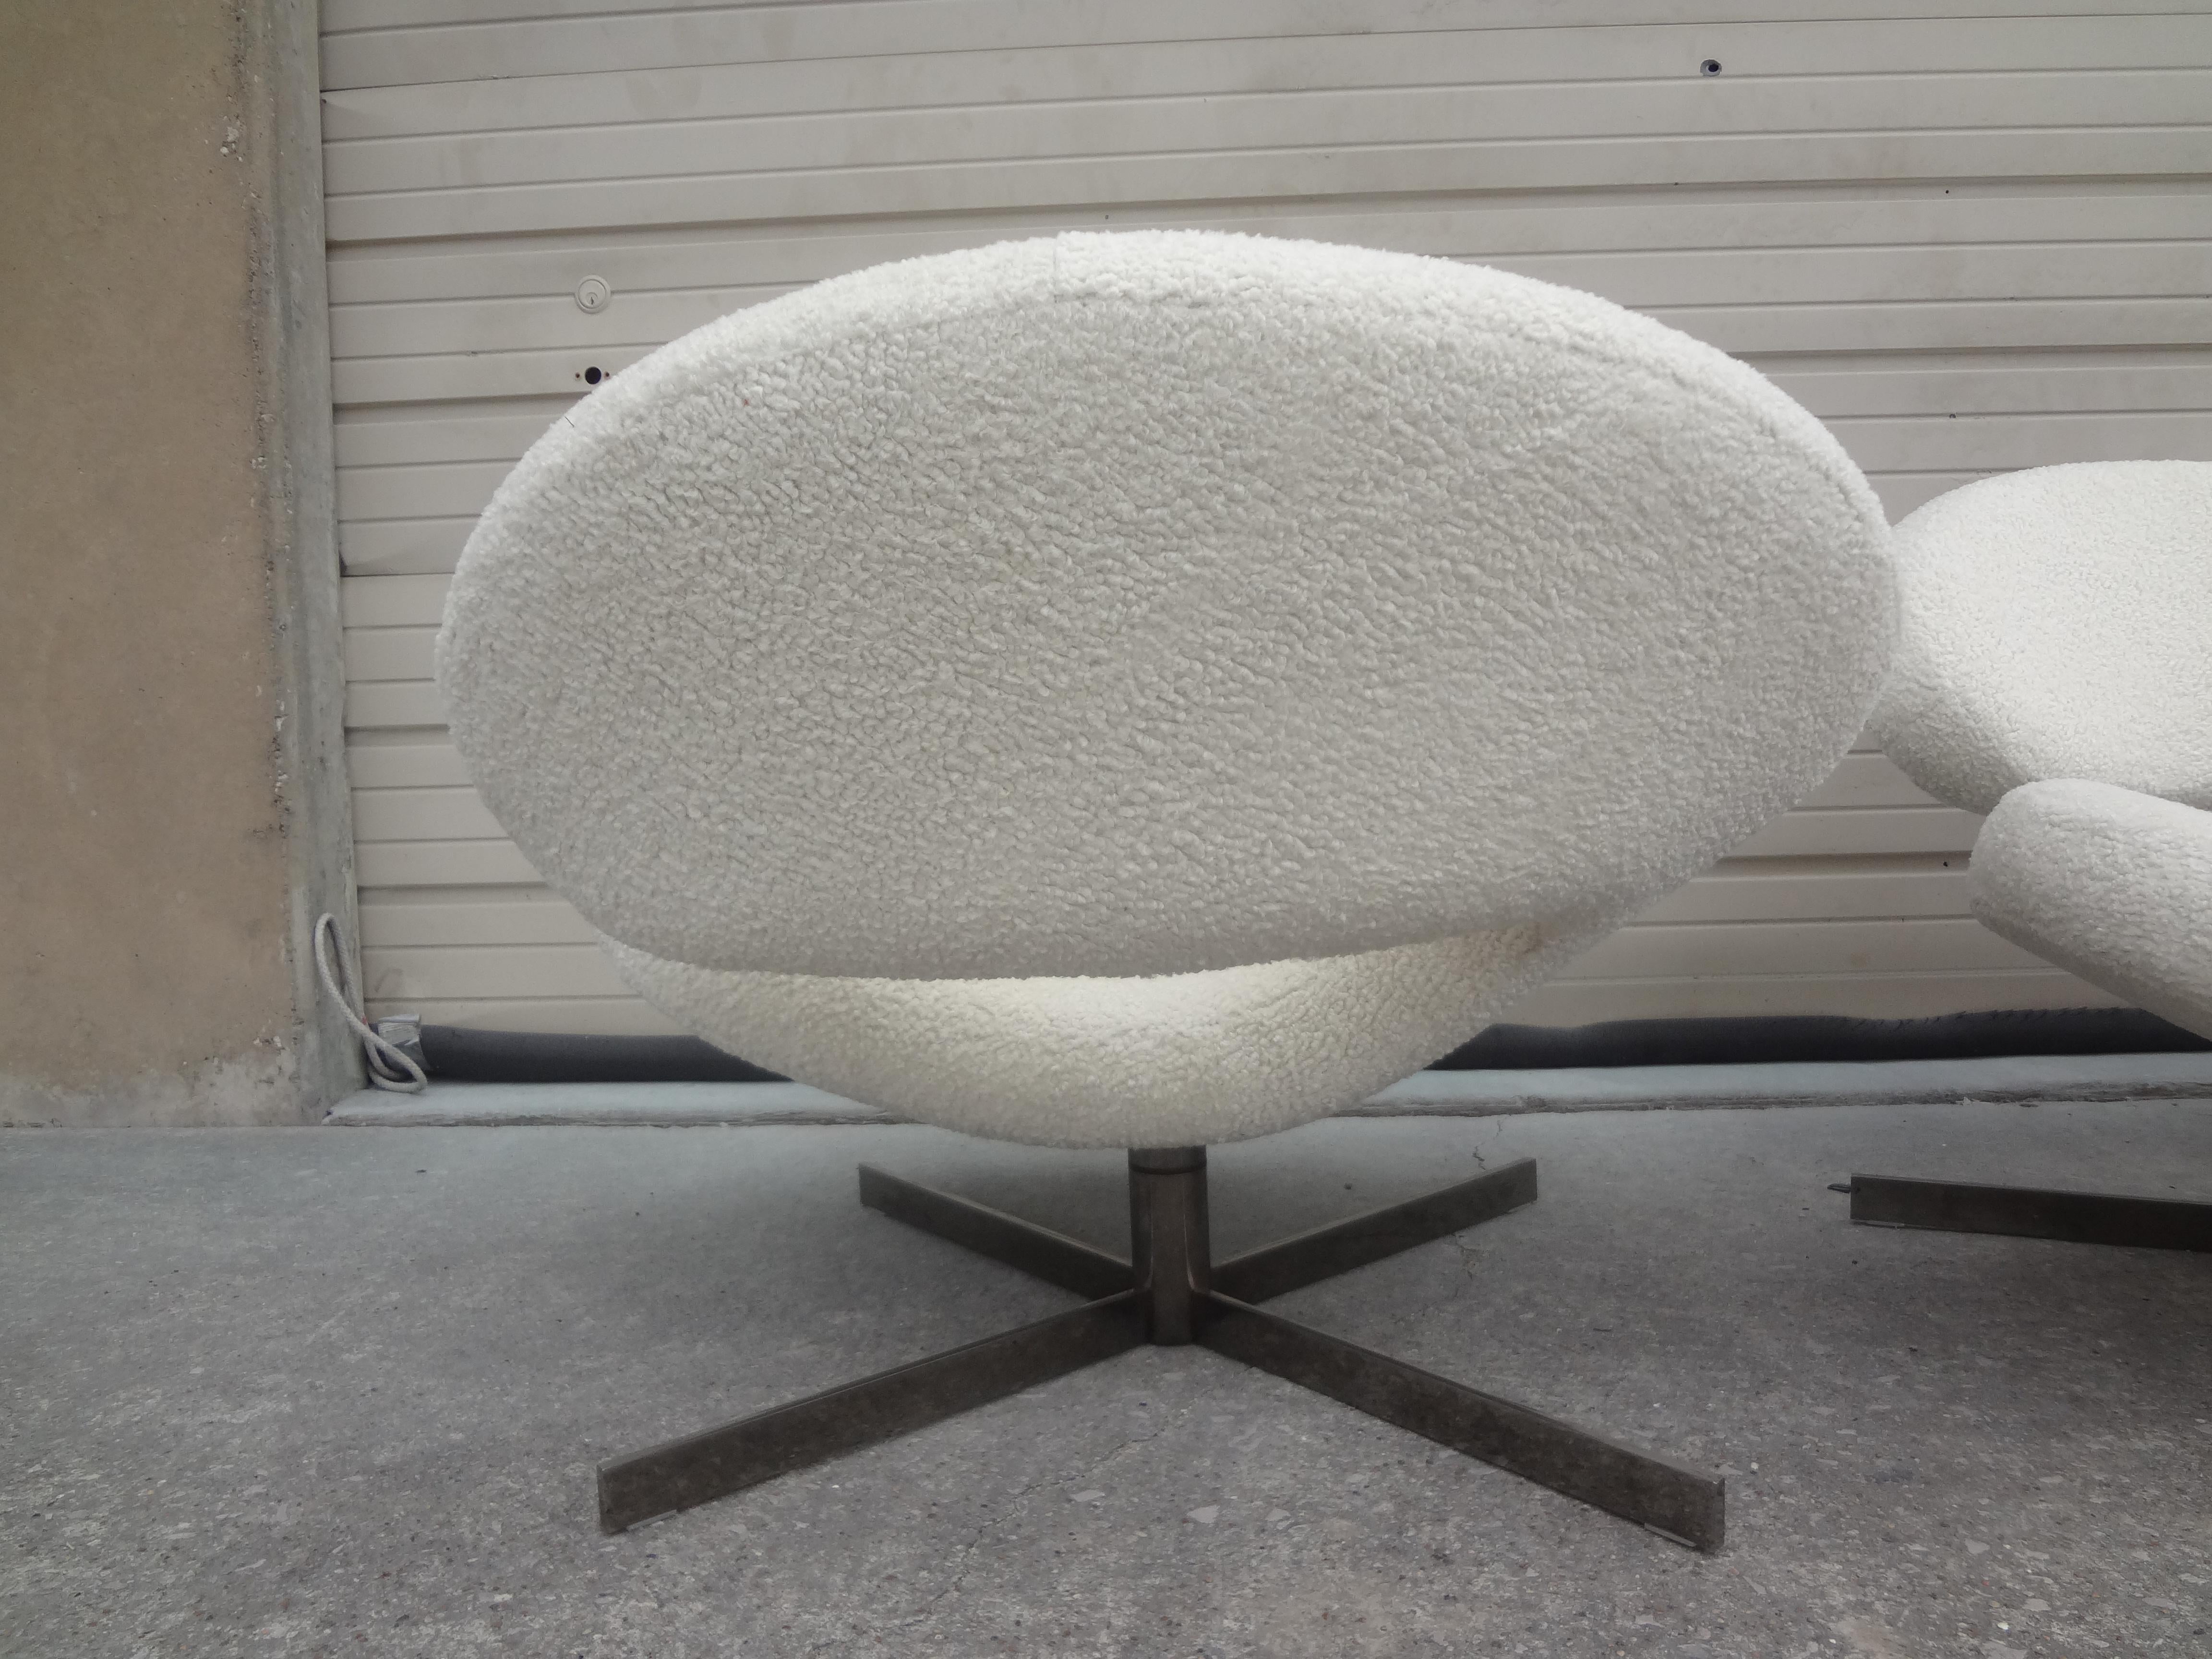 Pair of French Modernist Sculptural Swivel Chairs by Roche Bobois For Sale 3